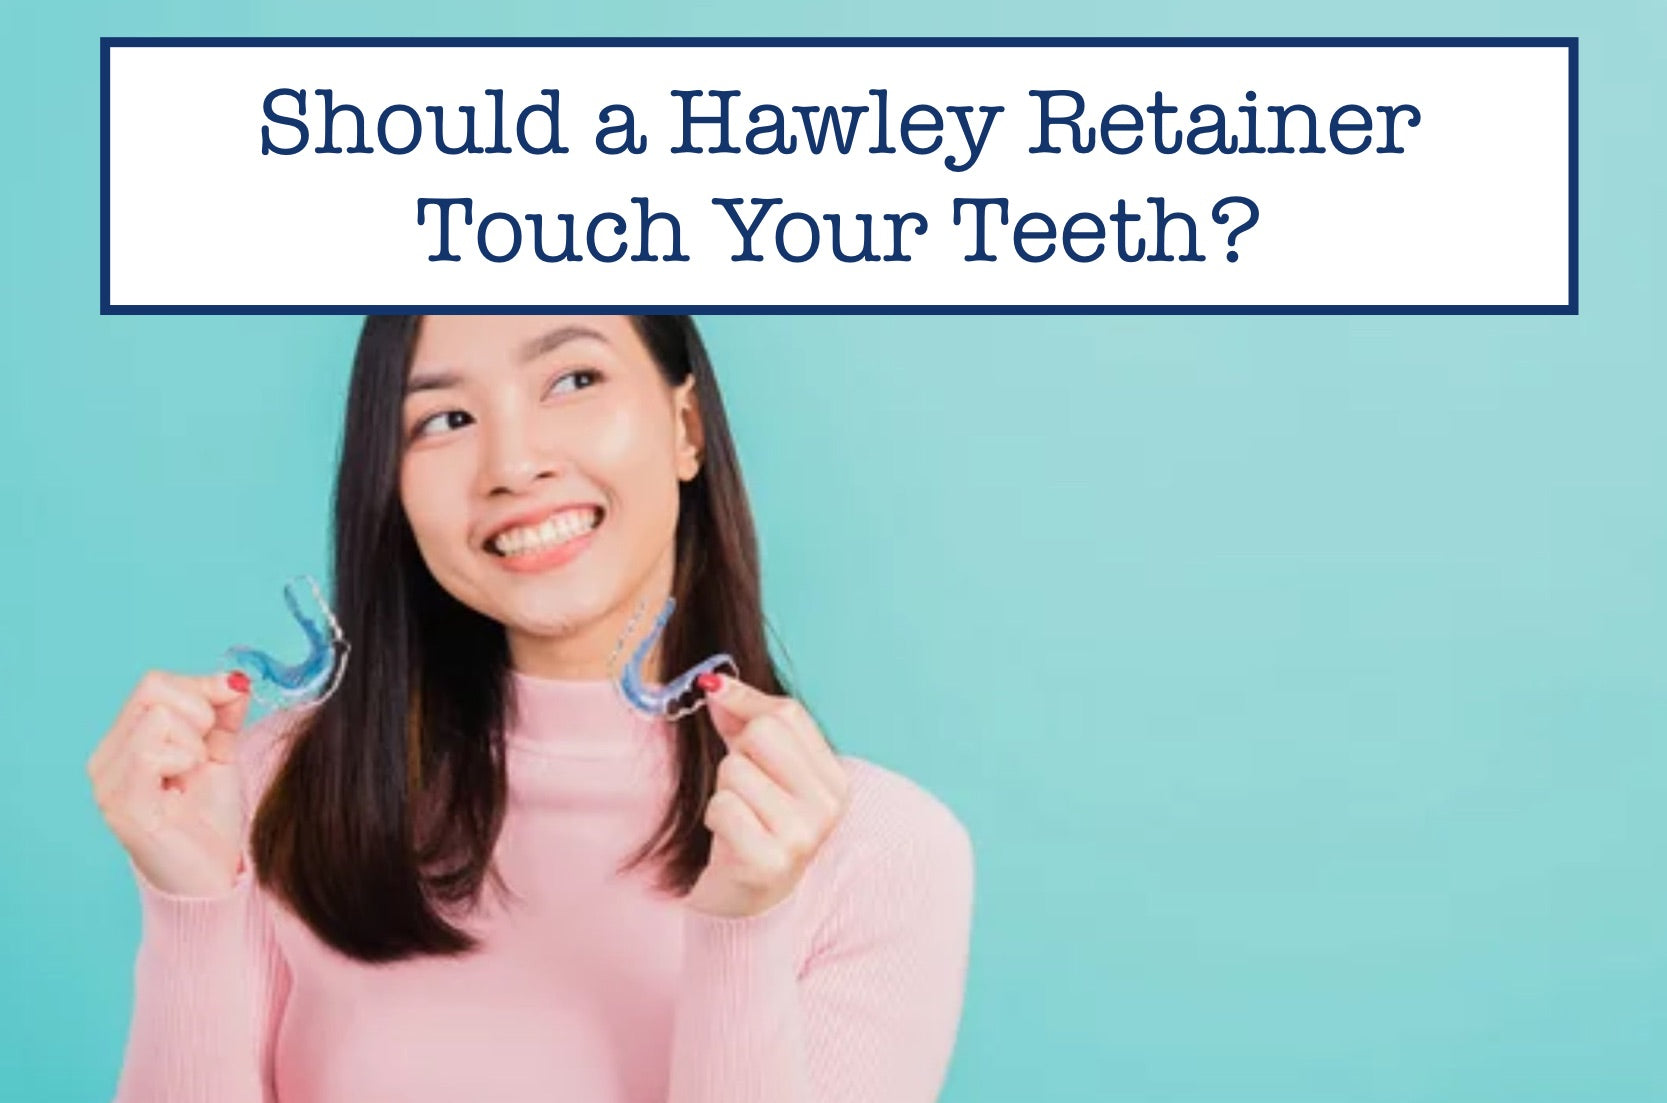 Should a Hawley Retainer Touch Your Teeth?